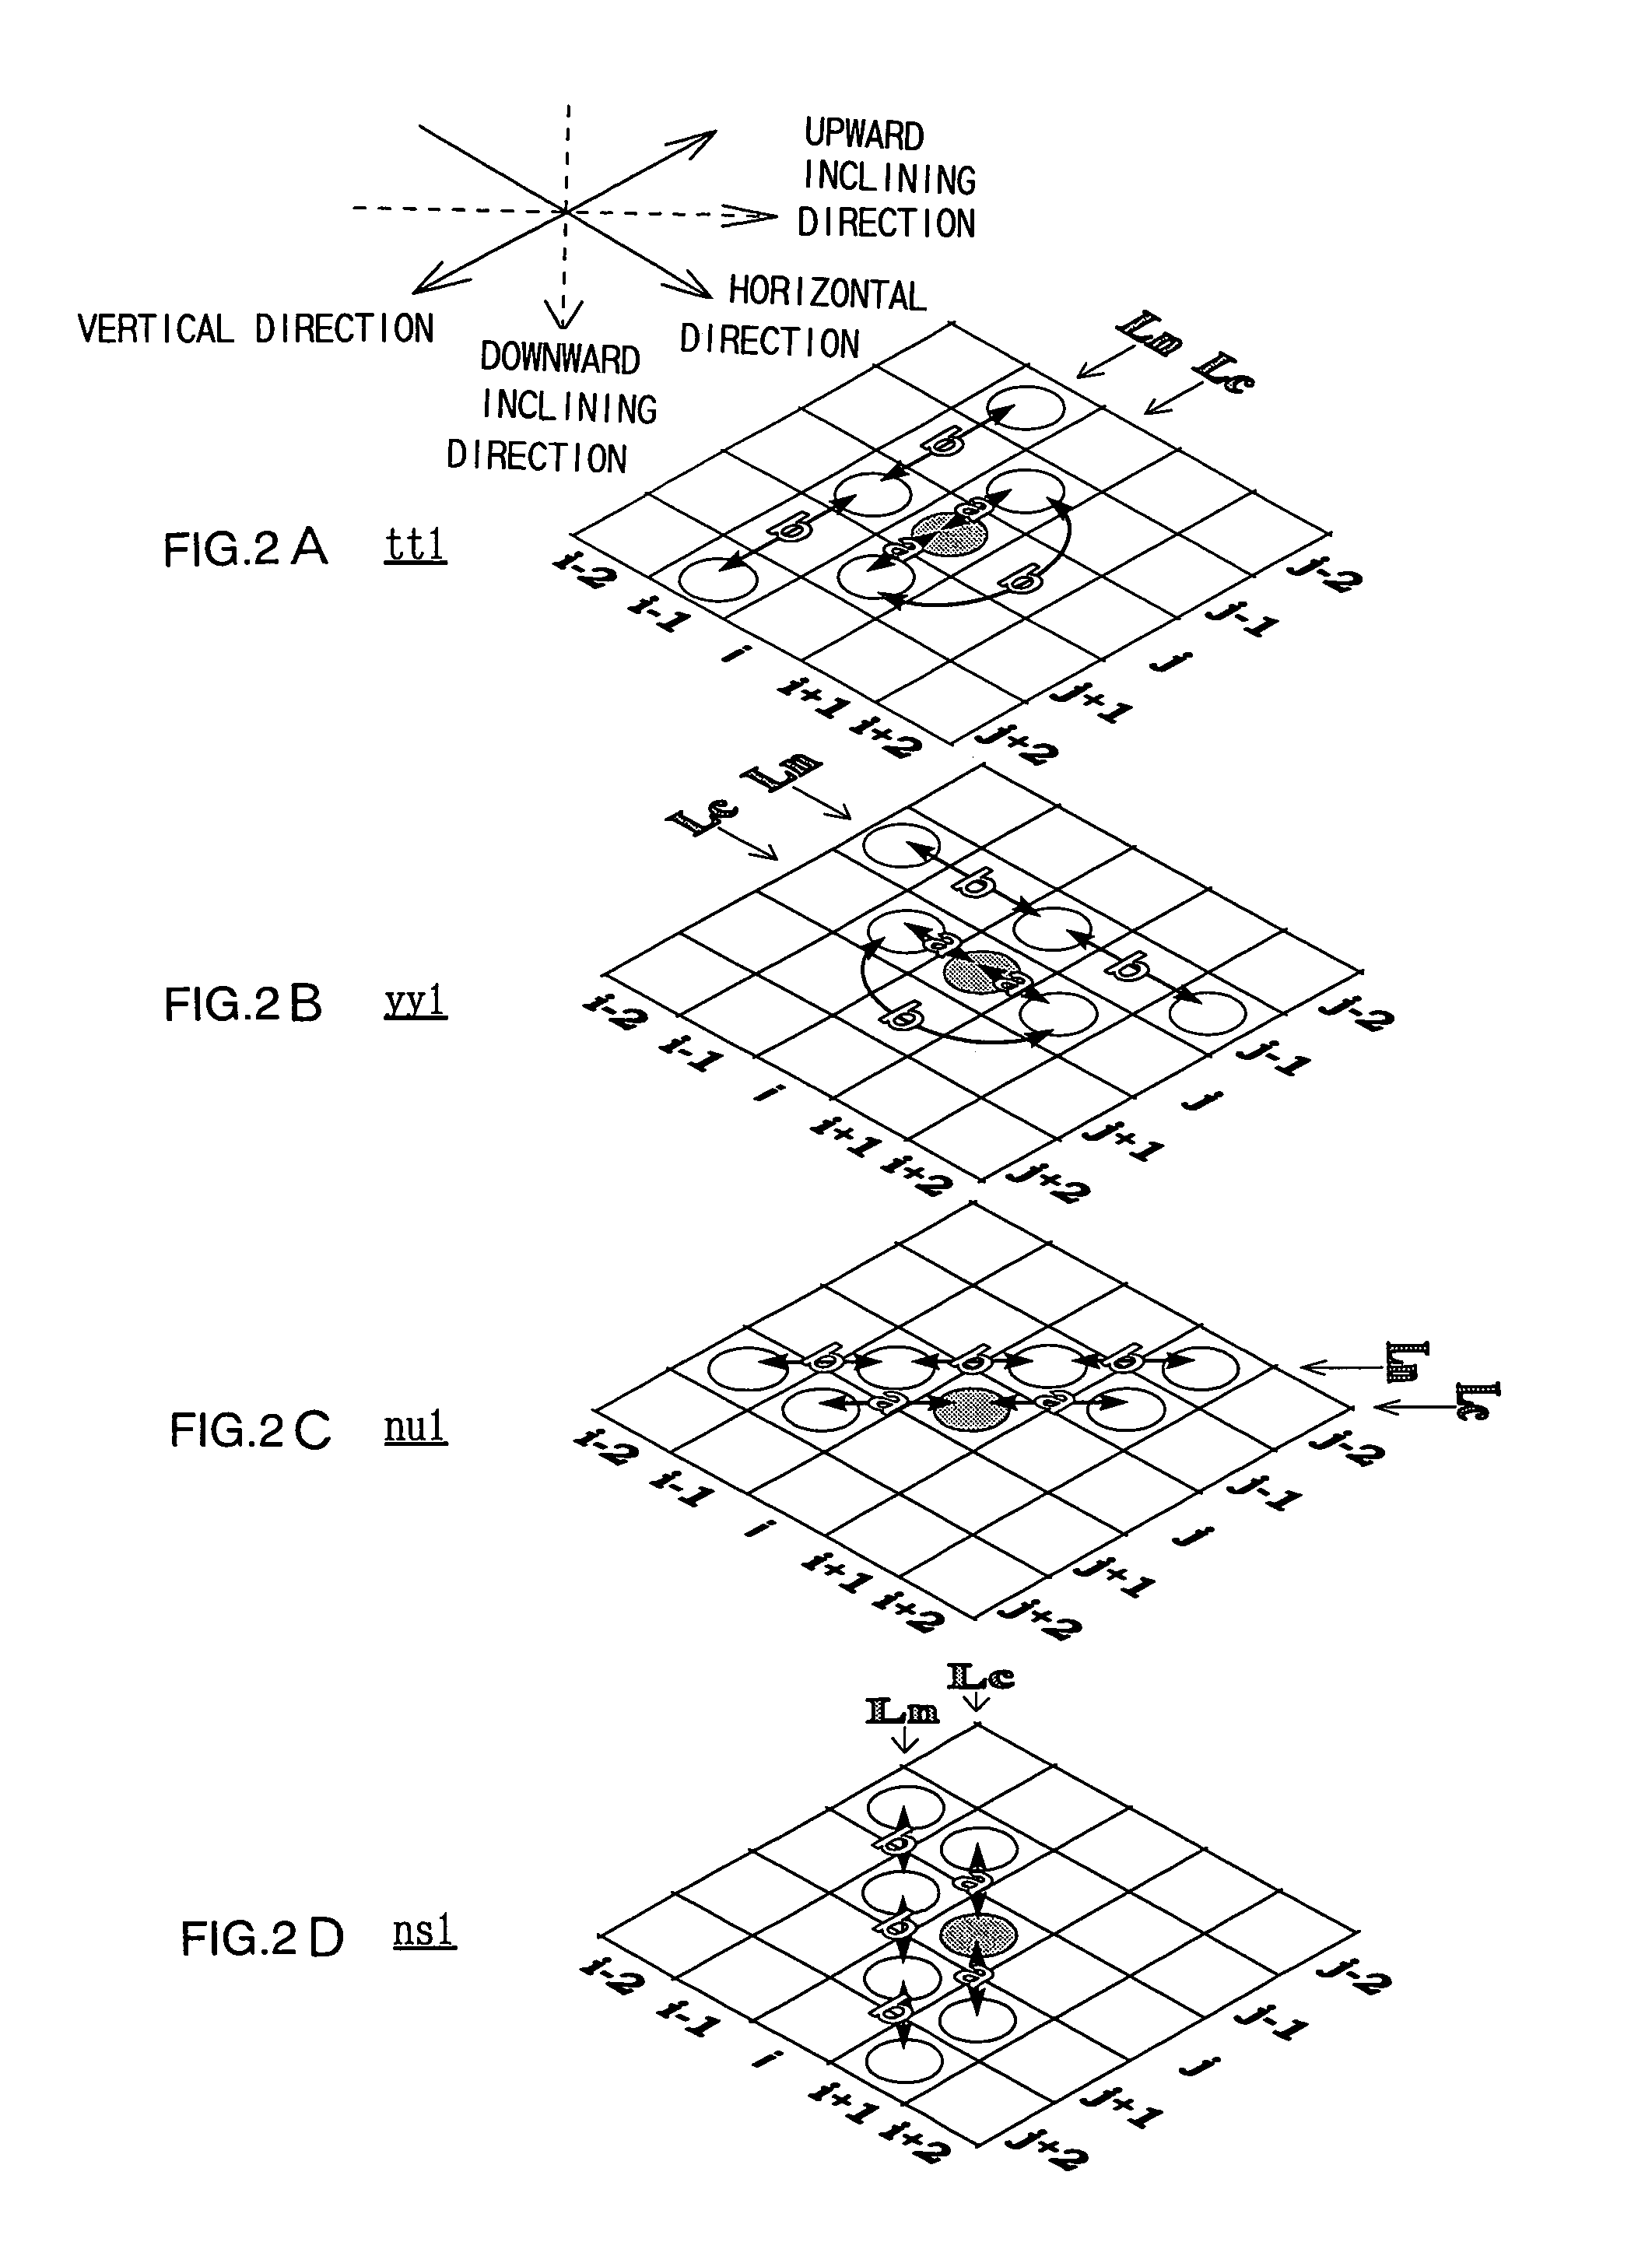 Image processing method for direction dependent low pass filtering